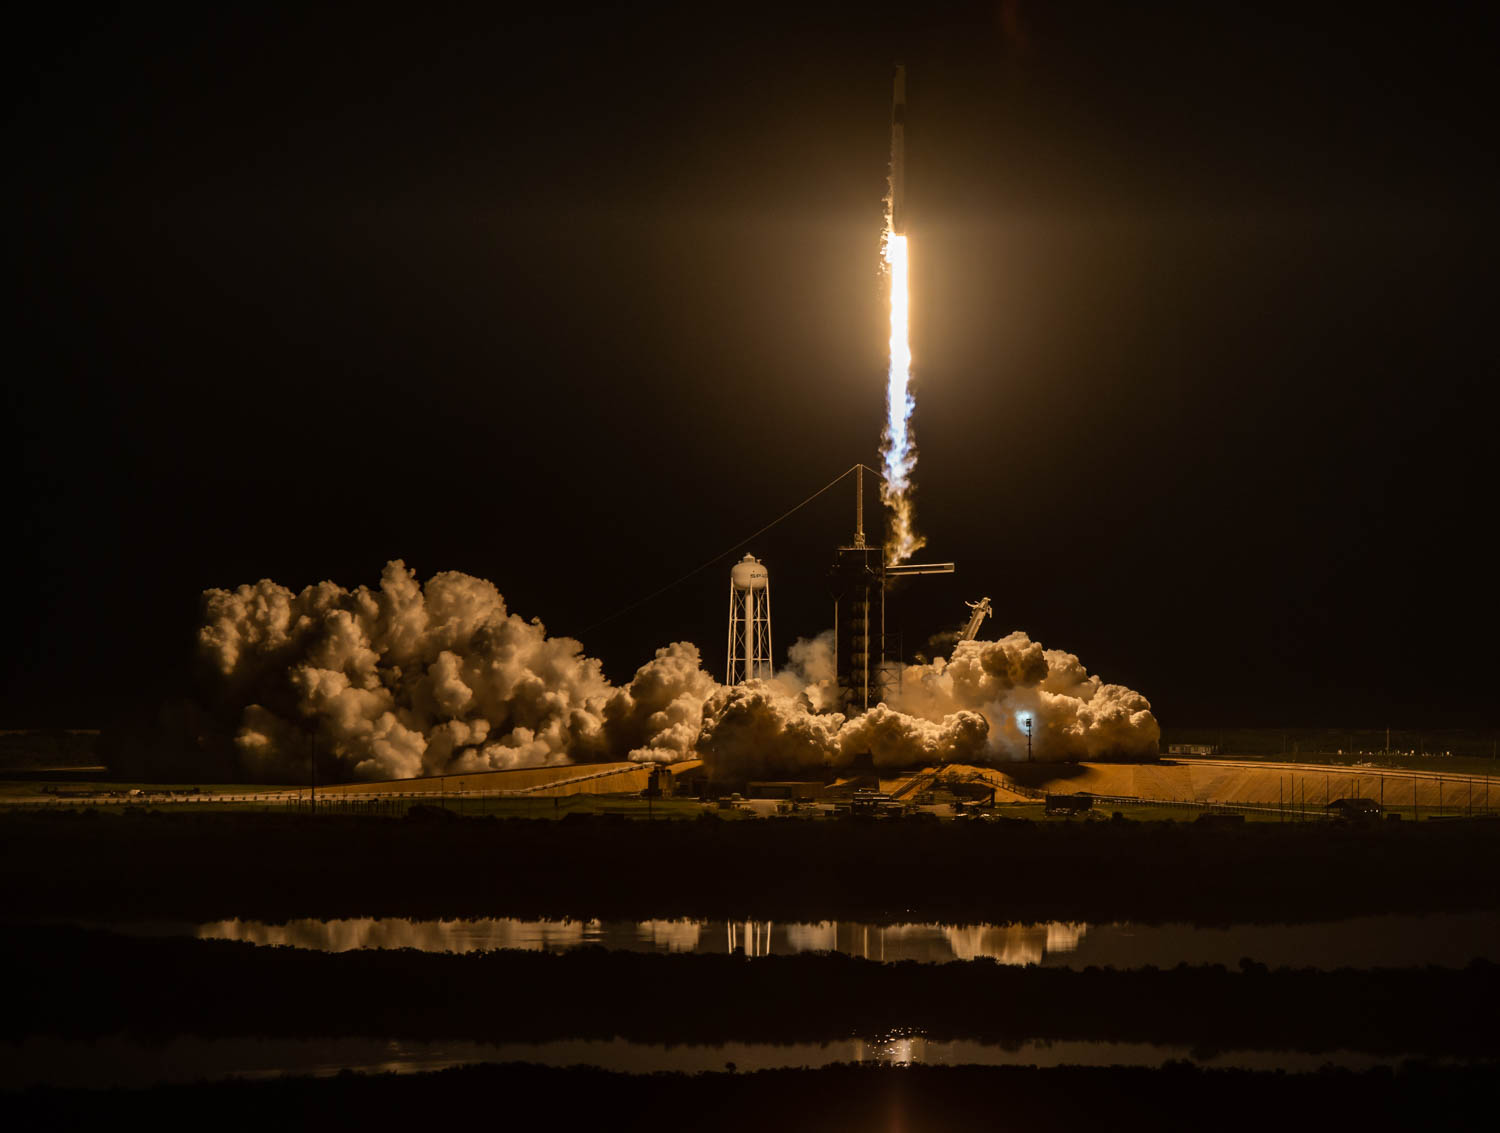  March 2 - 2019, a SpaceX’s Falcon 9 rocket liftoffs from Launch Pad 39 at the Kennedy Space Center in Florida, delivering the first Crew Dragon capsule to the International Space Station on its DM-1 Mission. 